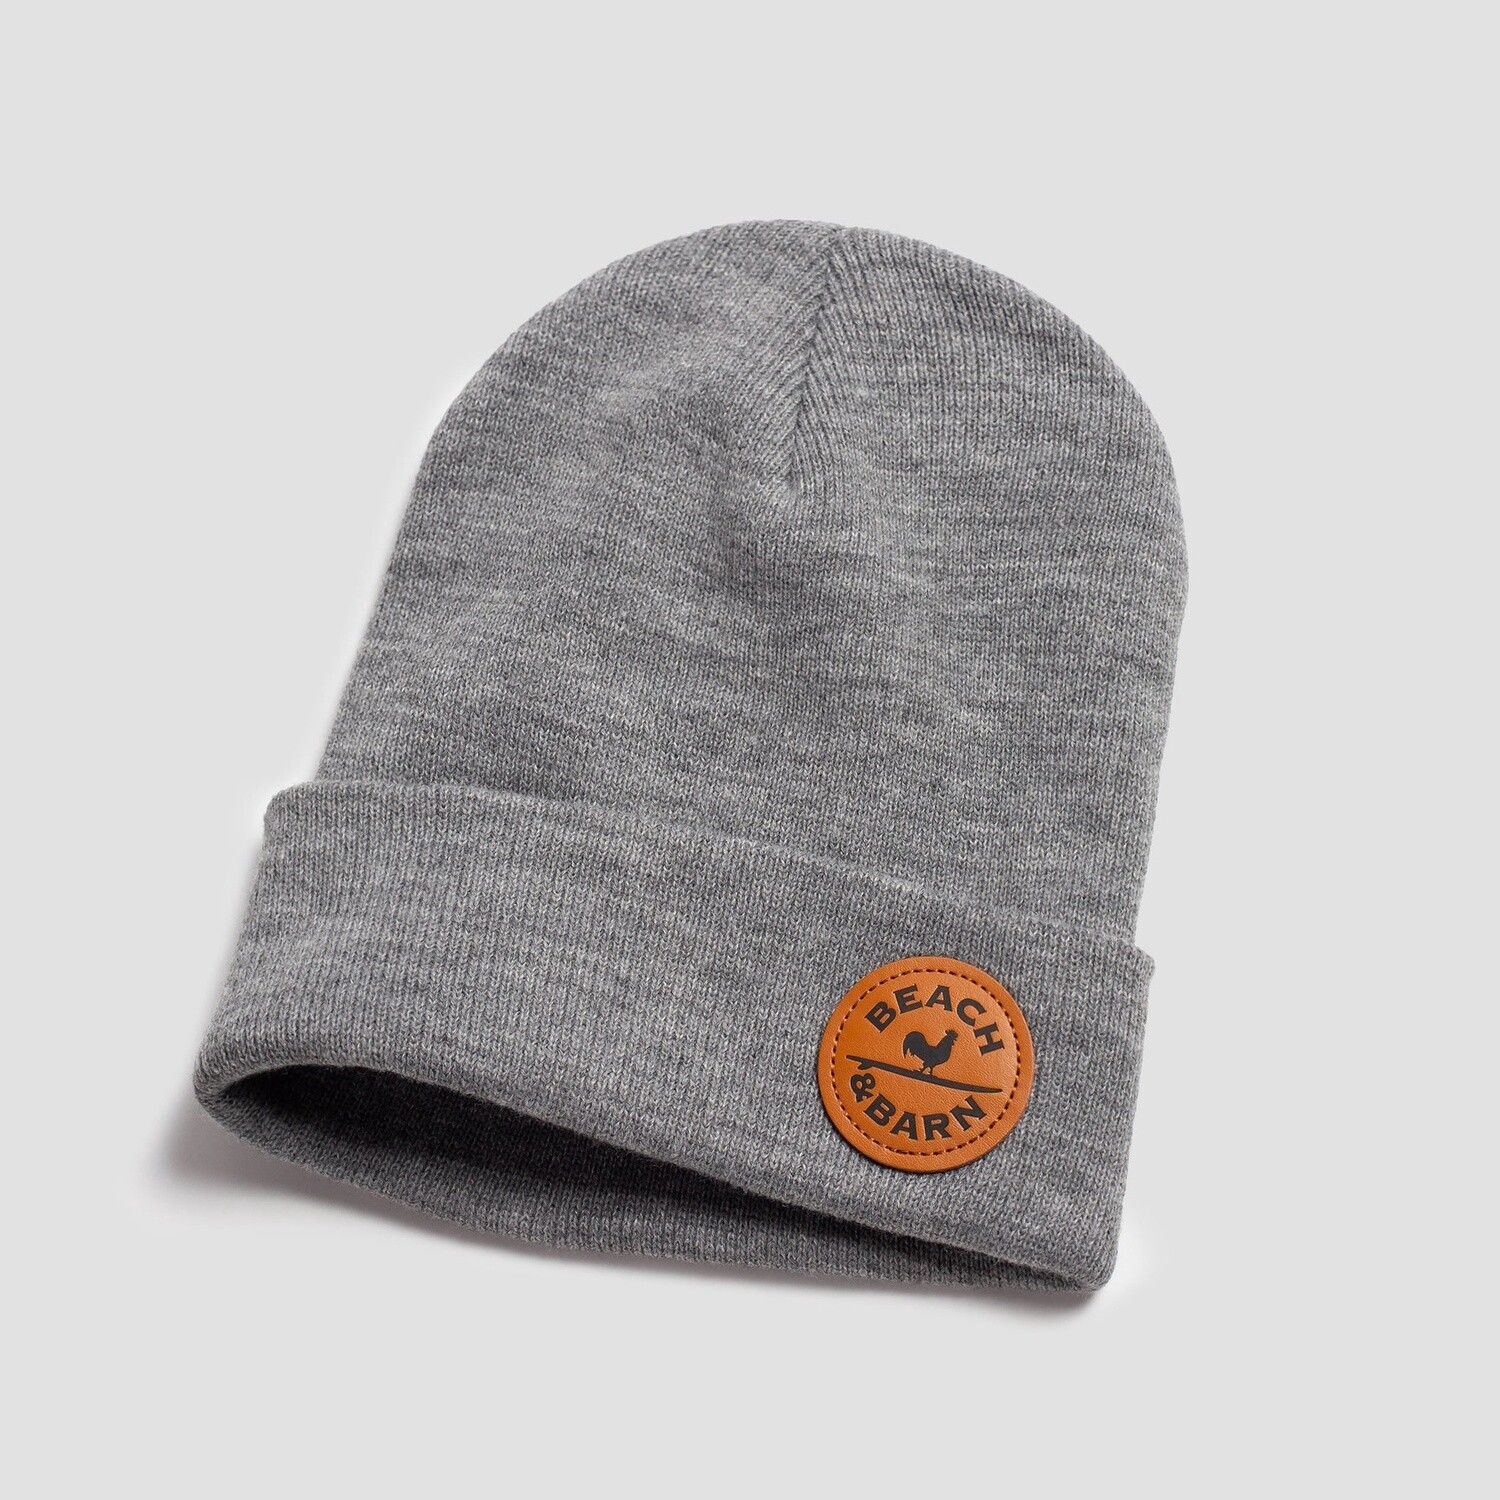 Beach and Barn Surfing Rooster Beanie - Heather Grey